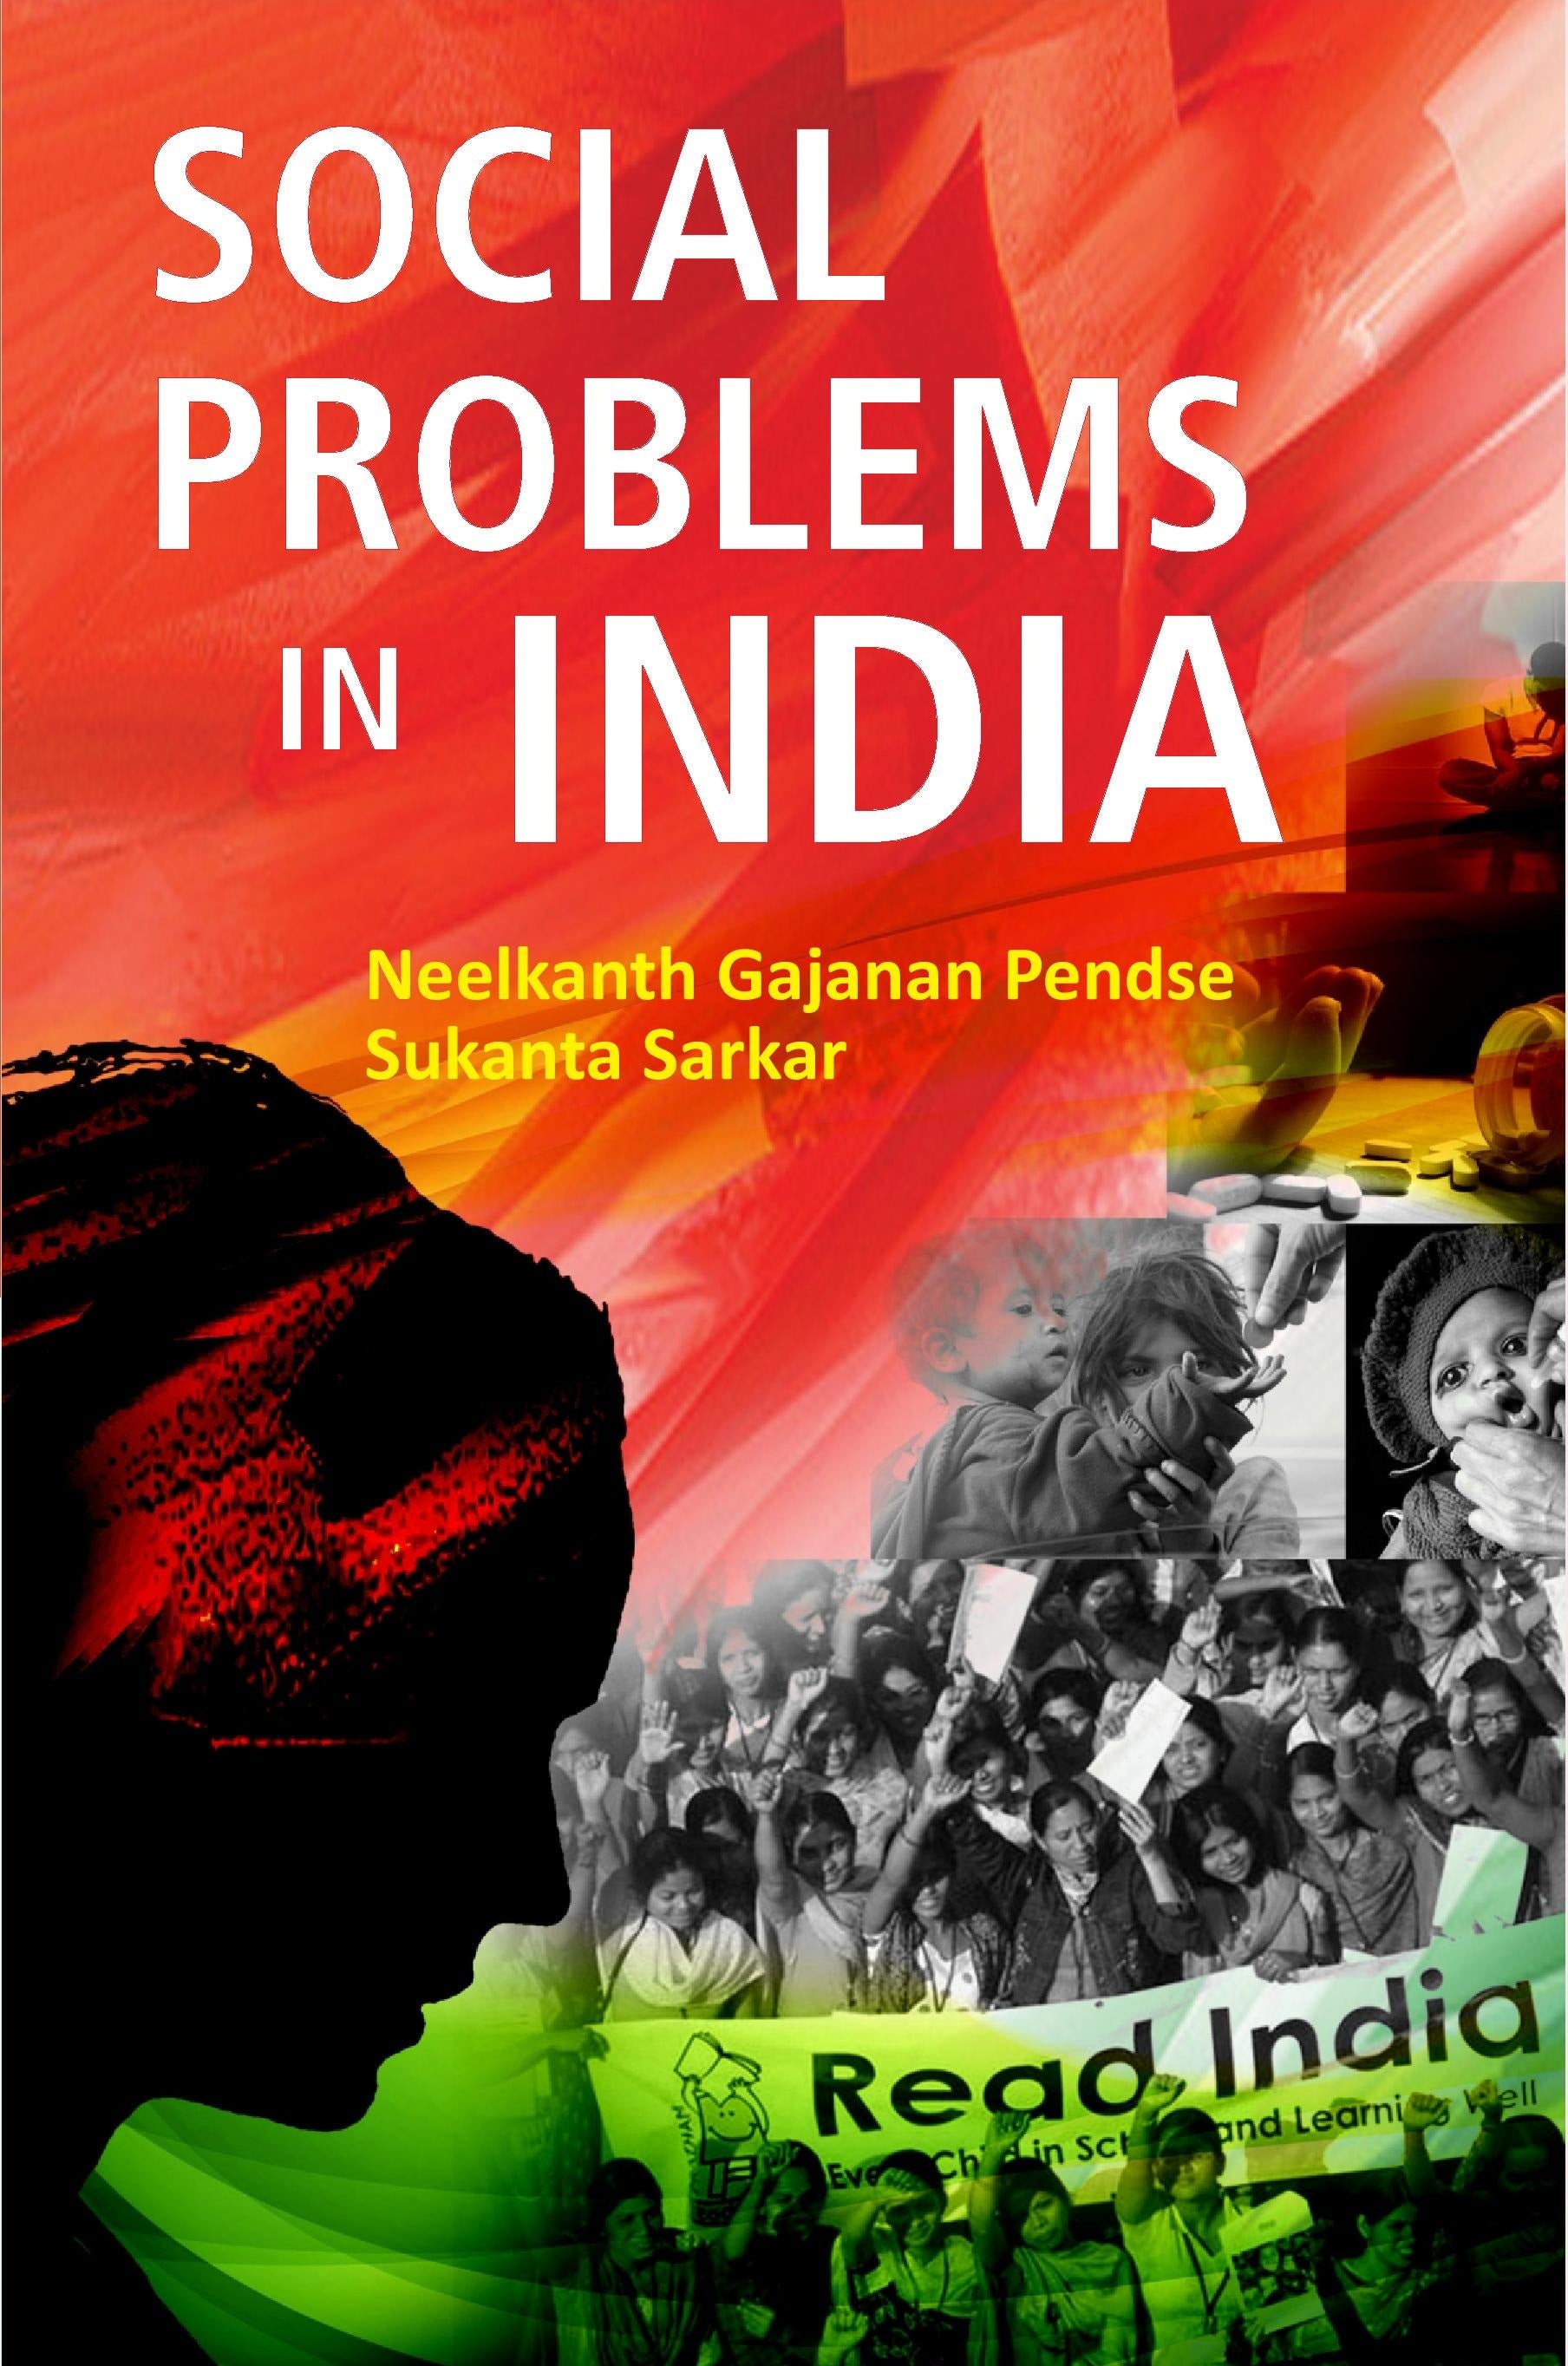 Social Problems in India